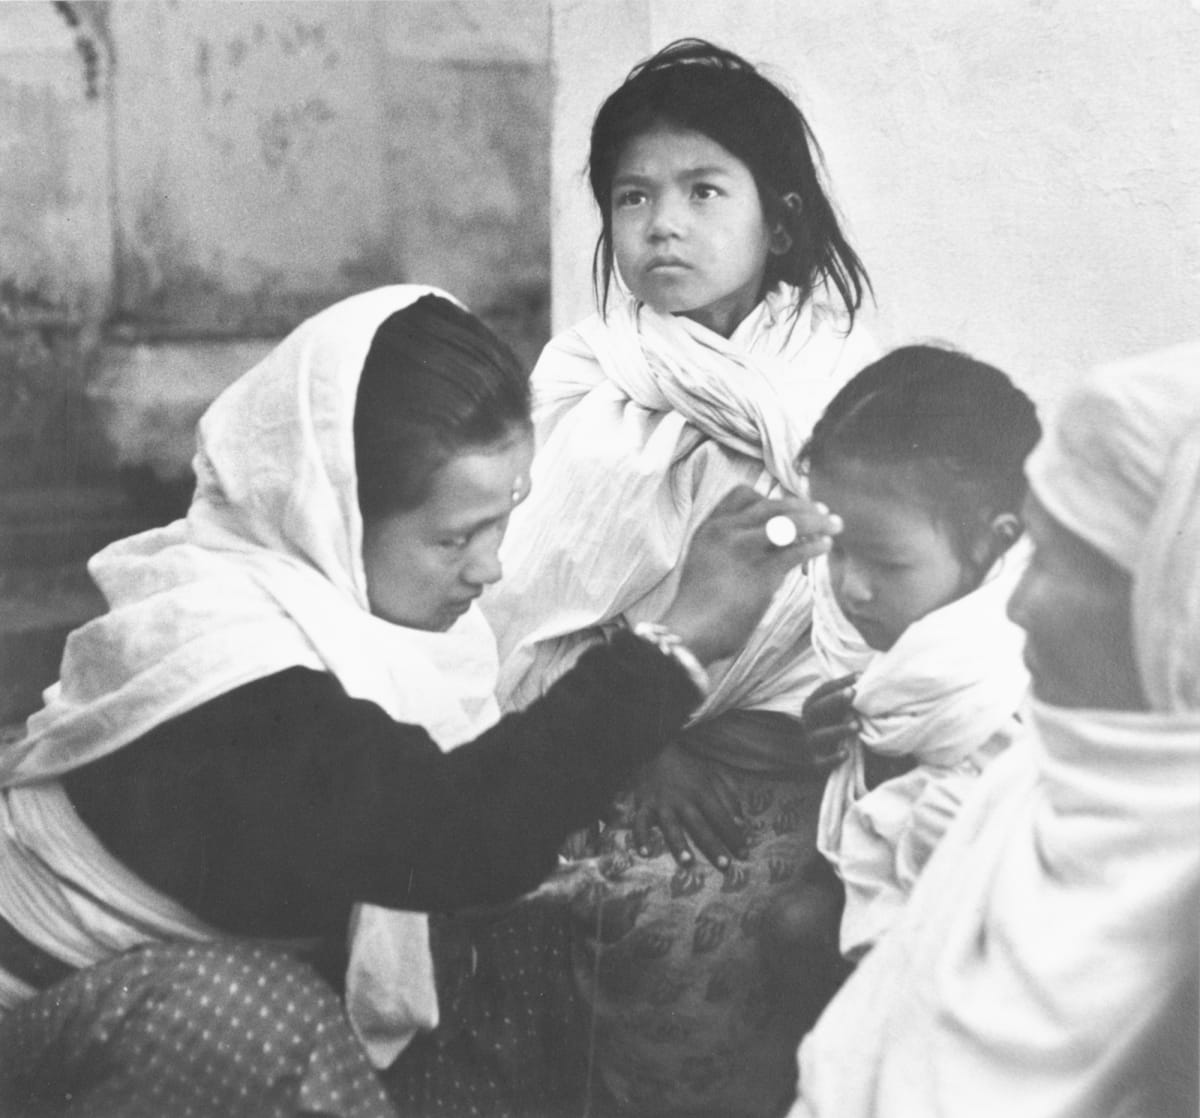 Nepal 1964 by Edward R. Miller  Image: Two adults and two children, all wrapped in white cloth.